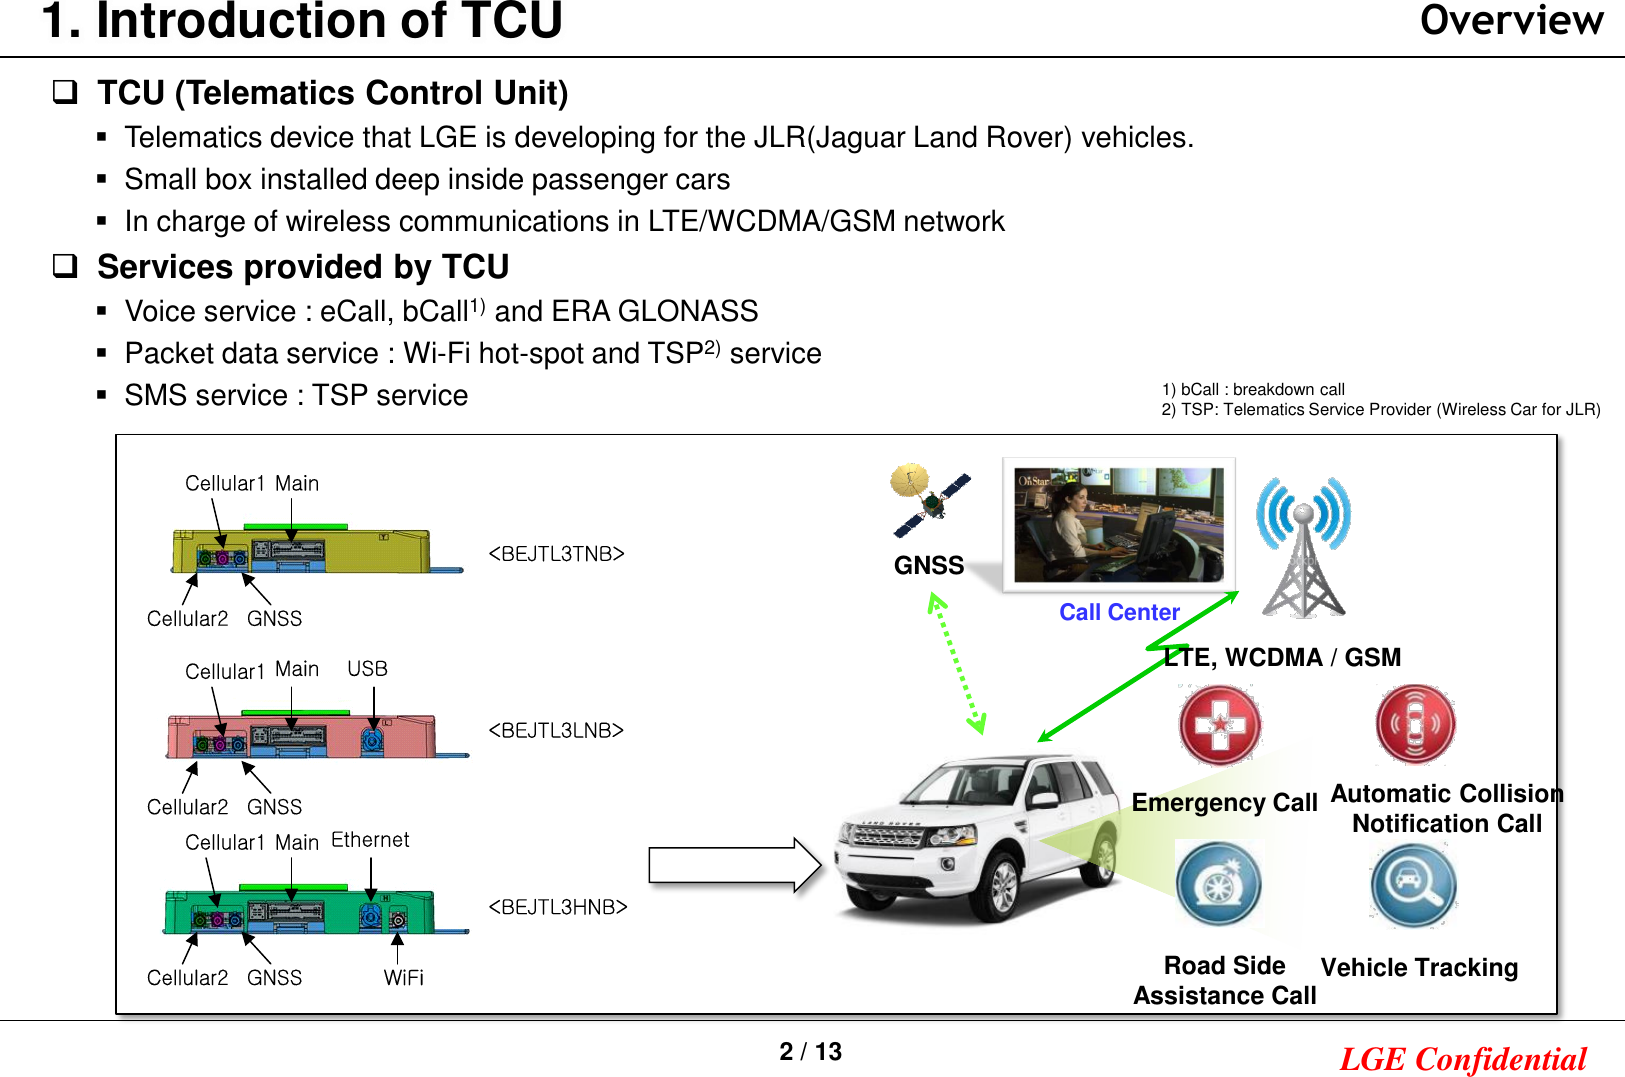 2 / 13 LGE Confidential1. Introduction of TCUTCU (Telematics Control Unit)Telematics device that LGE is developing for the JLR(Jaguar Land Rover) vehicles.Small box installed deep inside passenger carsIn charge of wireless communications in LTE/WCDMA/GSM networkServices provided by TCUVoice service : eCall, bCall1) and ERA GLONASSPacket data service : Wi-Fi hot-spot and TSP2) serviceSMS service : TSP serviceCall CenterGNSSEmergency Call Automatic CollisionNotification CallRoad SideAssistance CallVehicle TrackingLTE, WCDMA / GSMOverview1) bCall : breakdown call2) TSP: Telematics Service Provider (Wireless Car for JLR)   &lt;BEJTL3TNB&gt;&lt;BEJTL3LNB&gt;&lt;BEJTL3HNB&gt;Cellular2Cellular1GNSSMainCellular2Cellular1GNSSCellular2Cellular1GNSSMainMainUSBEthernetWiFi